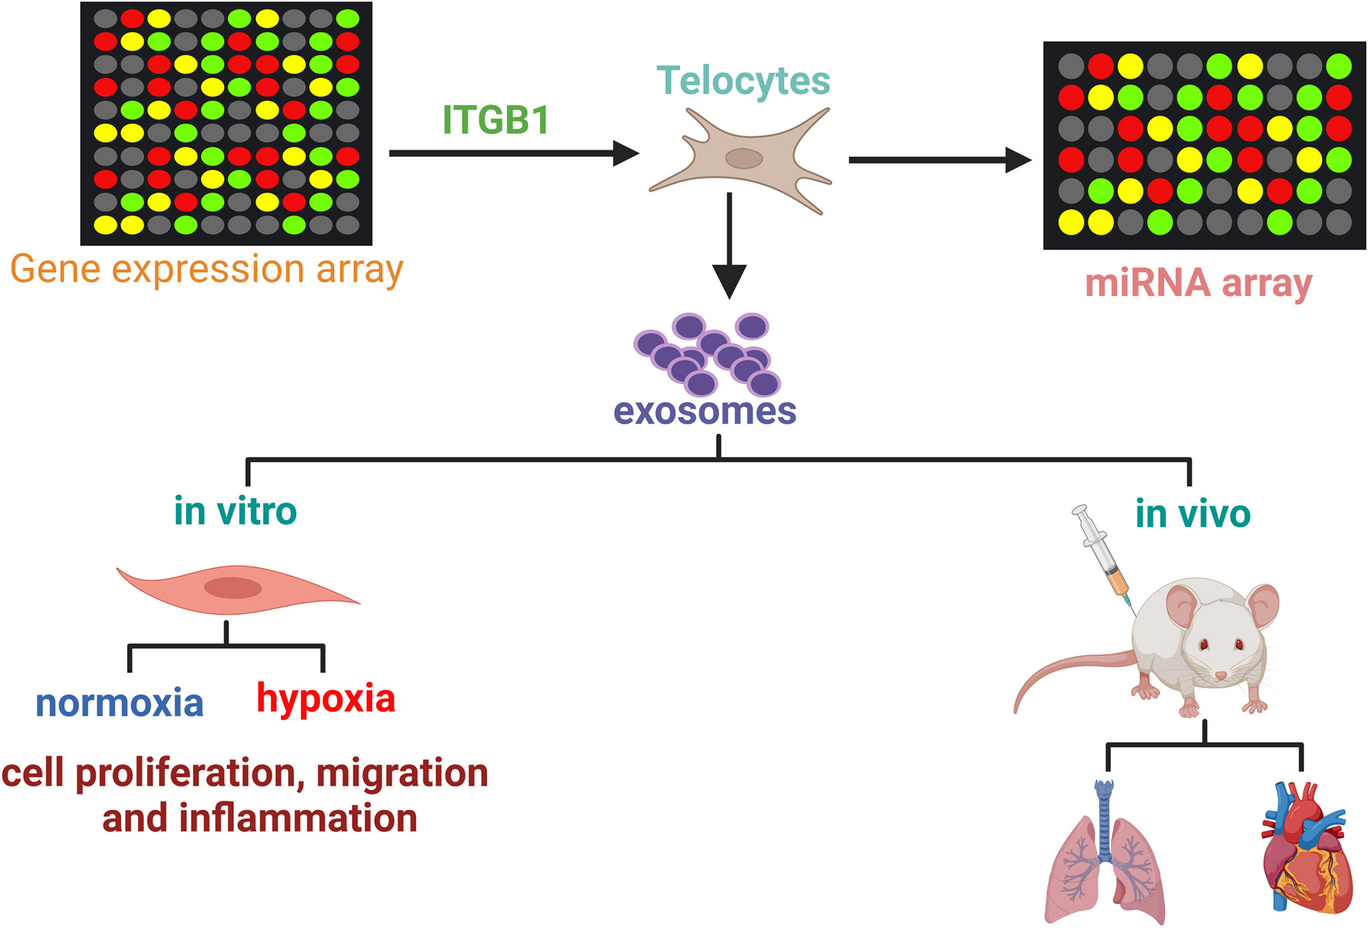 Exosomes enriched by miR-429-3p derived from ITGB1 modified Telocytes alleviates hypoxia-induced pulmonary arterial hypertension through regulating Rac1 expression